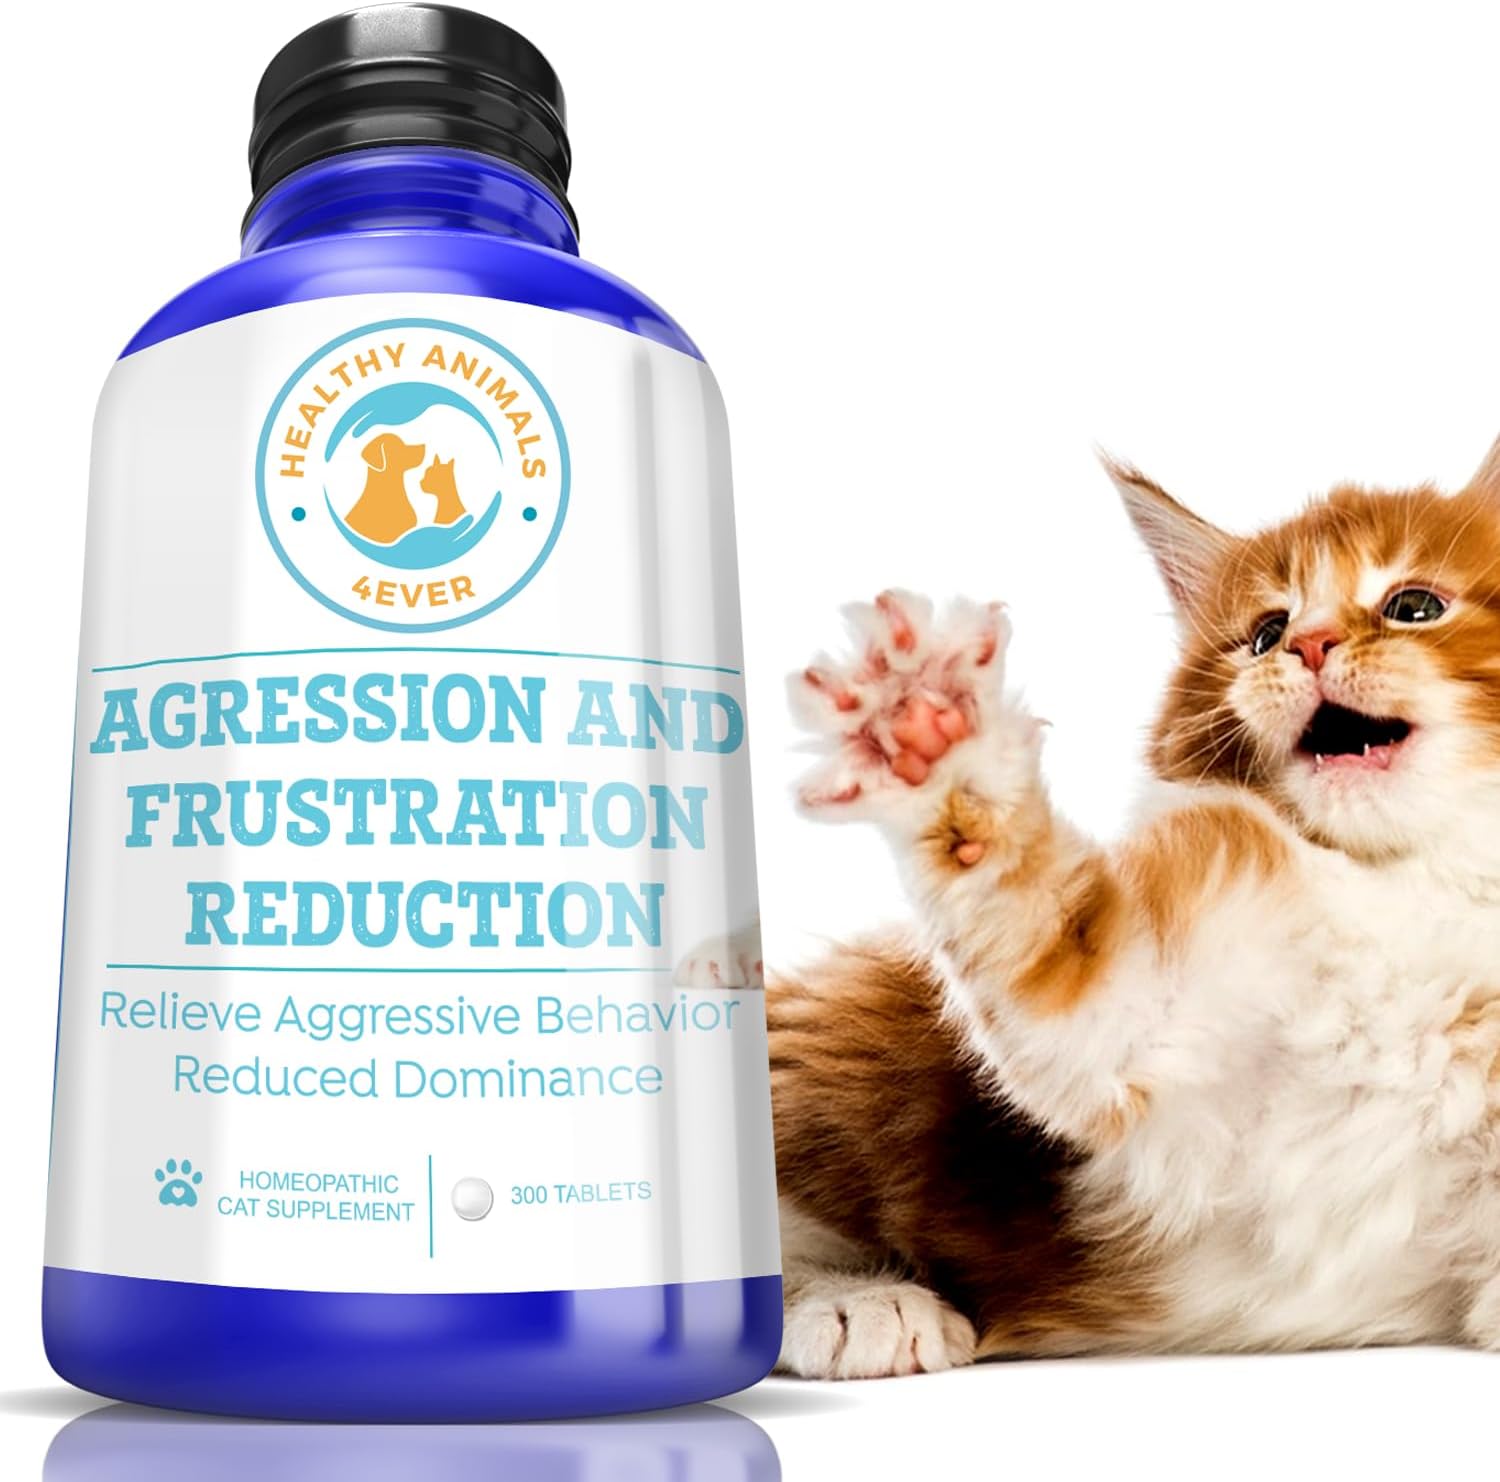 All-Natural Cat Calming Tablets for Stress and Aggressive Behavior - Help Reduce Cat Aggression/Frustration & Promote Relaxation - Homeopathic & Highly Effective - 300 Tablets